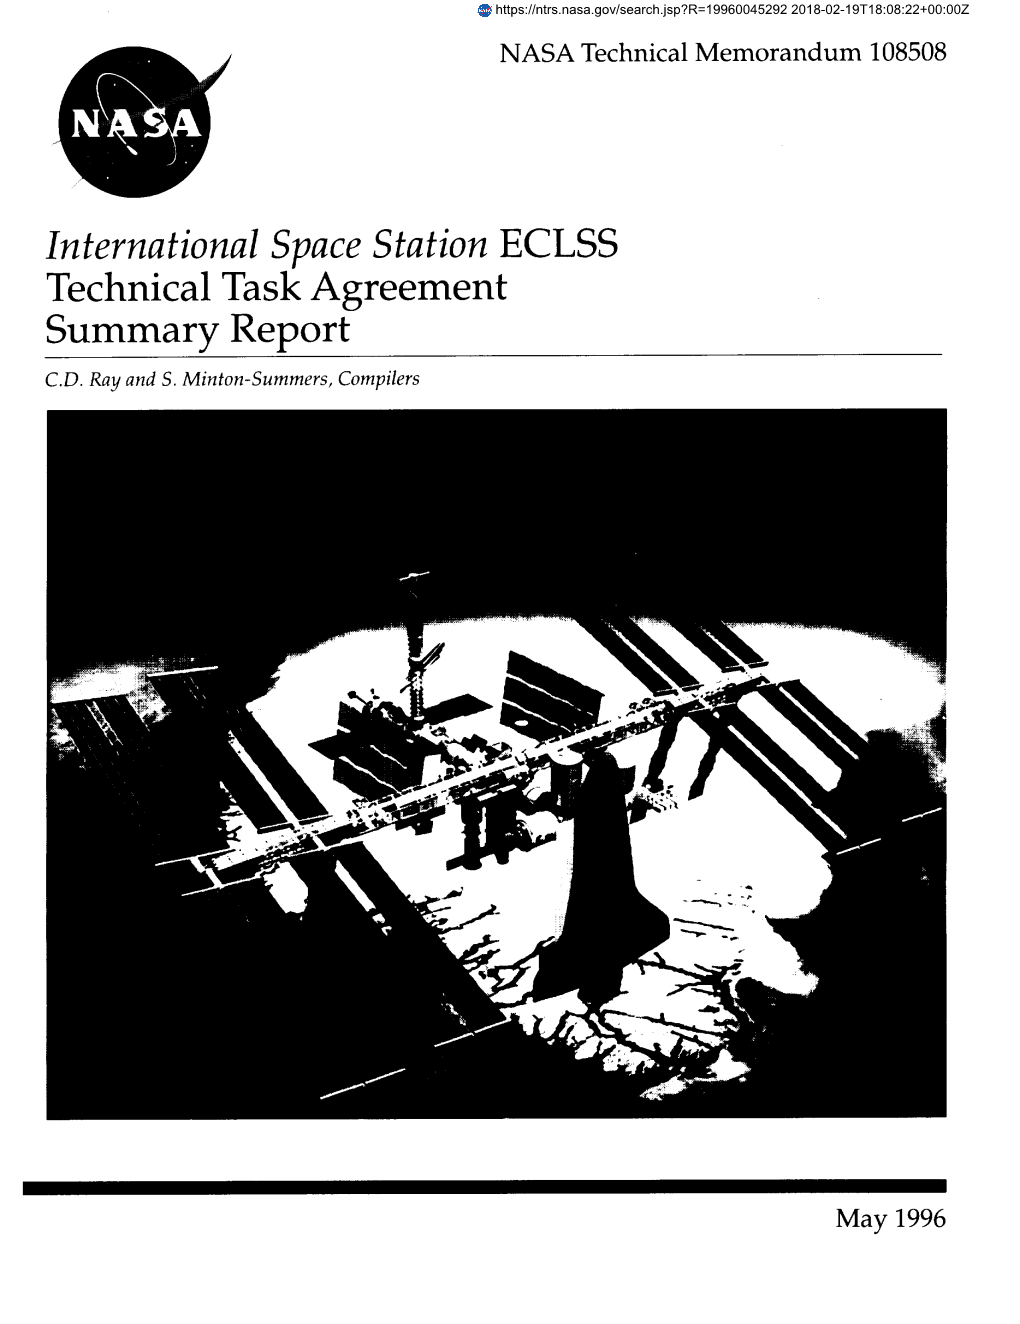 International Space Station ECLSS Technical Task Agreement Summary Report